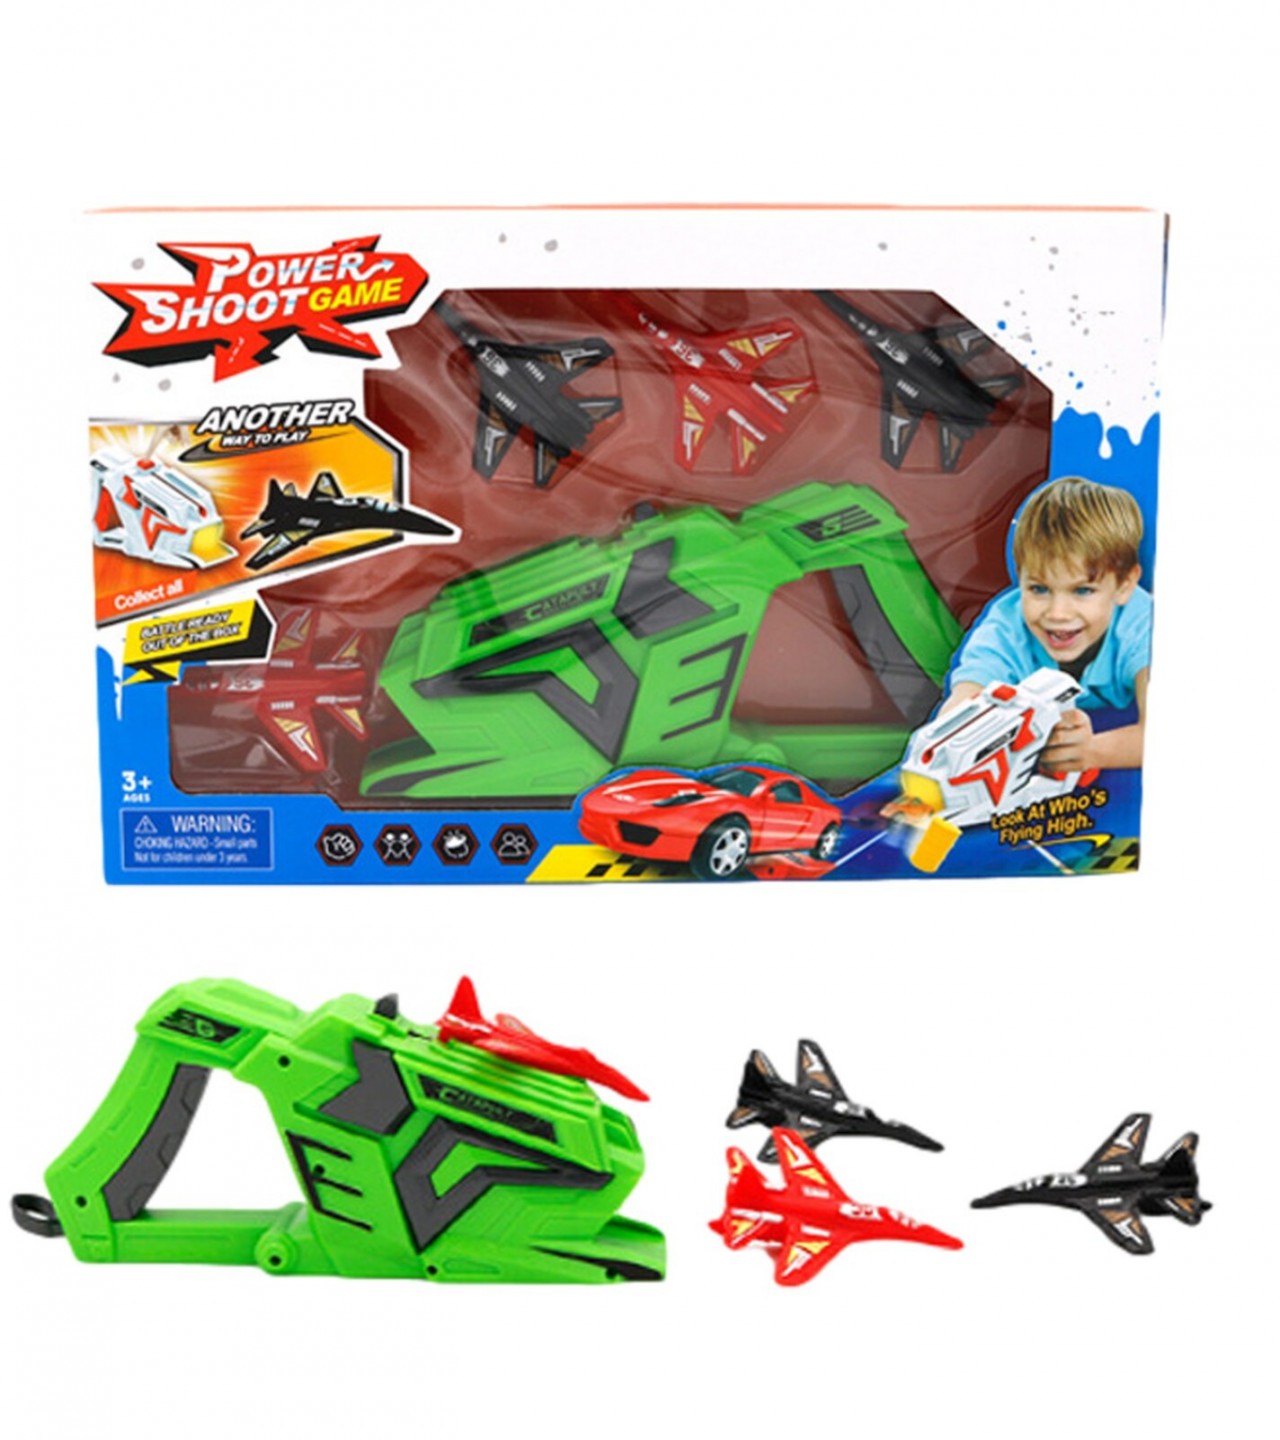 Air Battle Toy One-Click Ejection Model With 4 Airplane One Car Outdoor Fun Toy for Kids - Multi